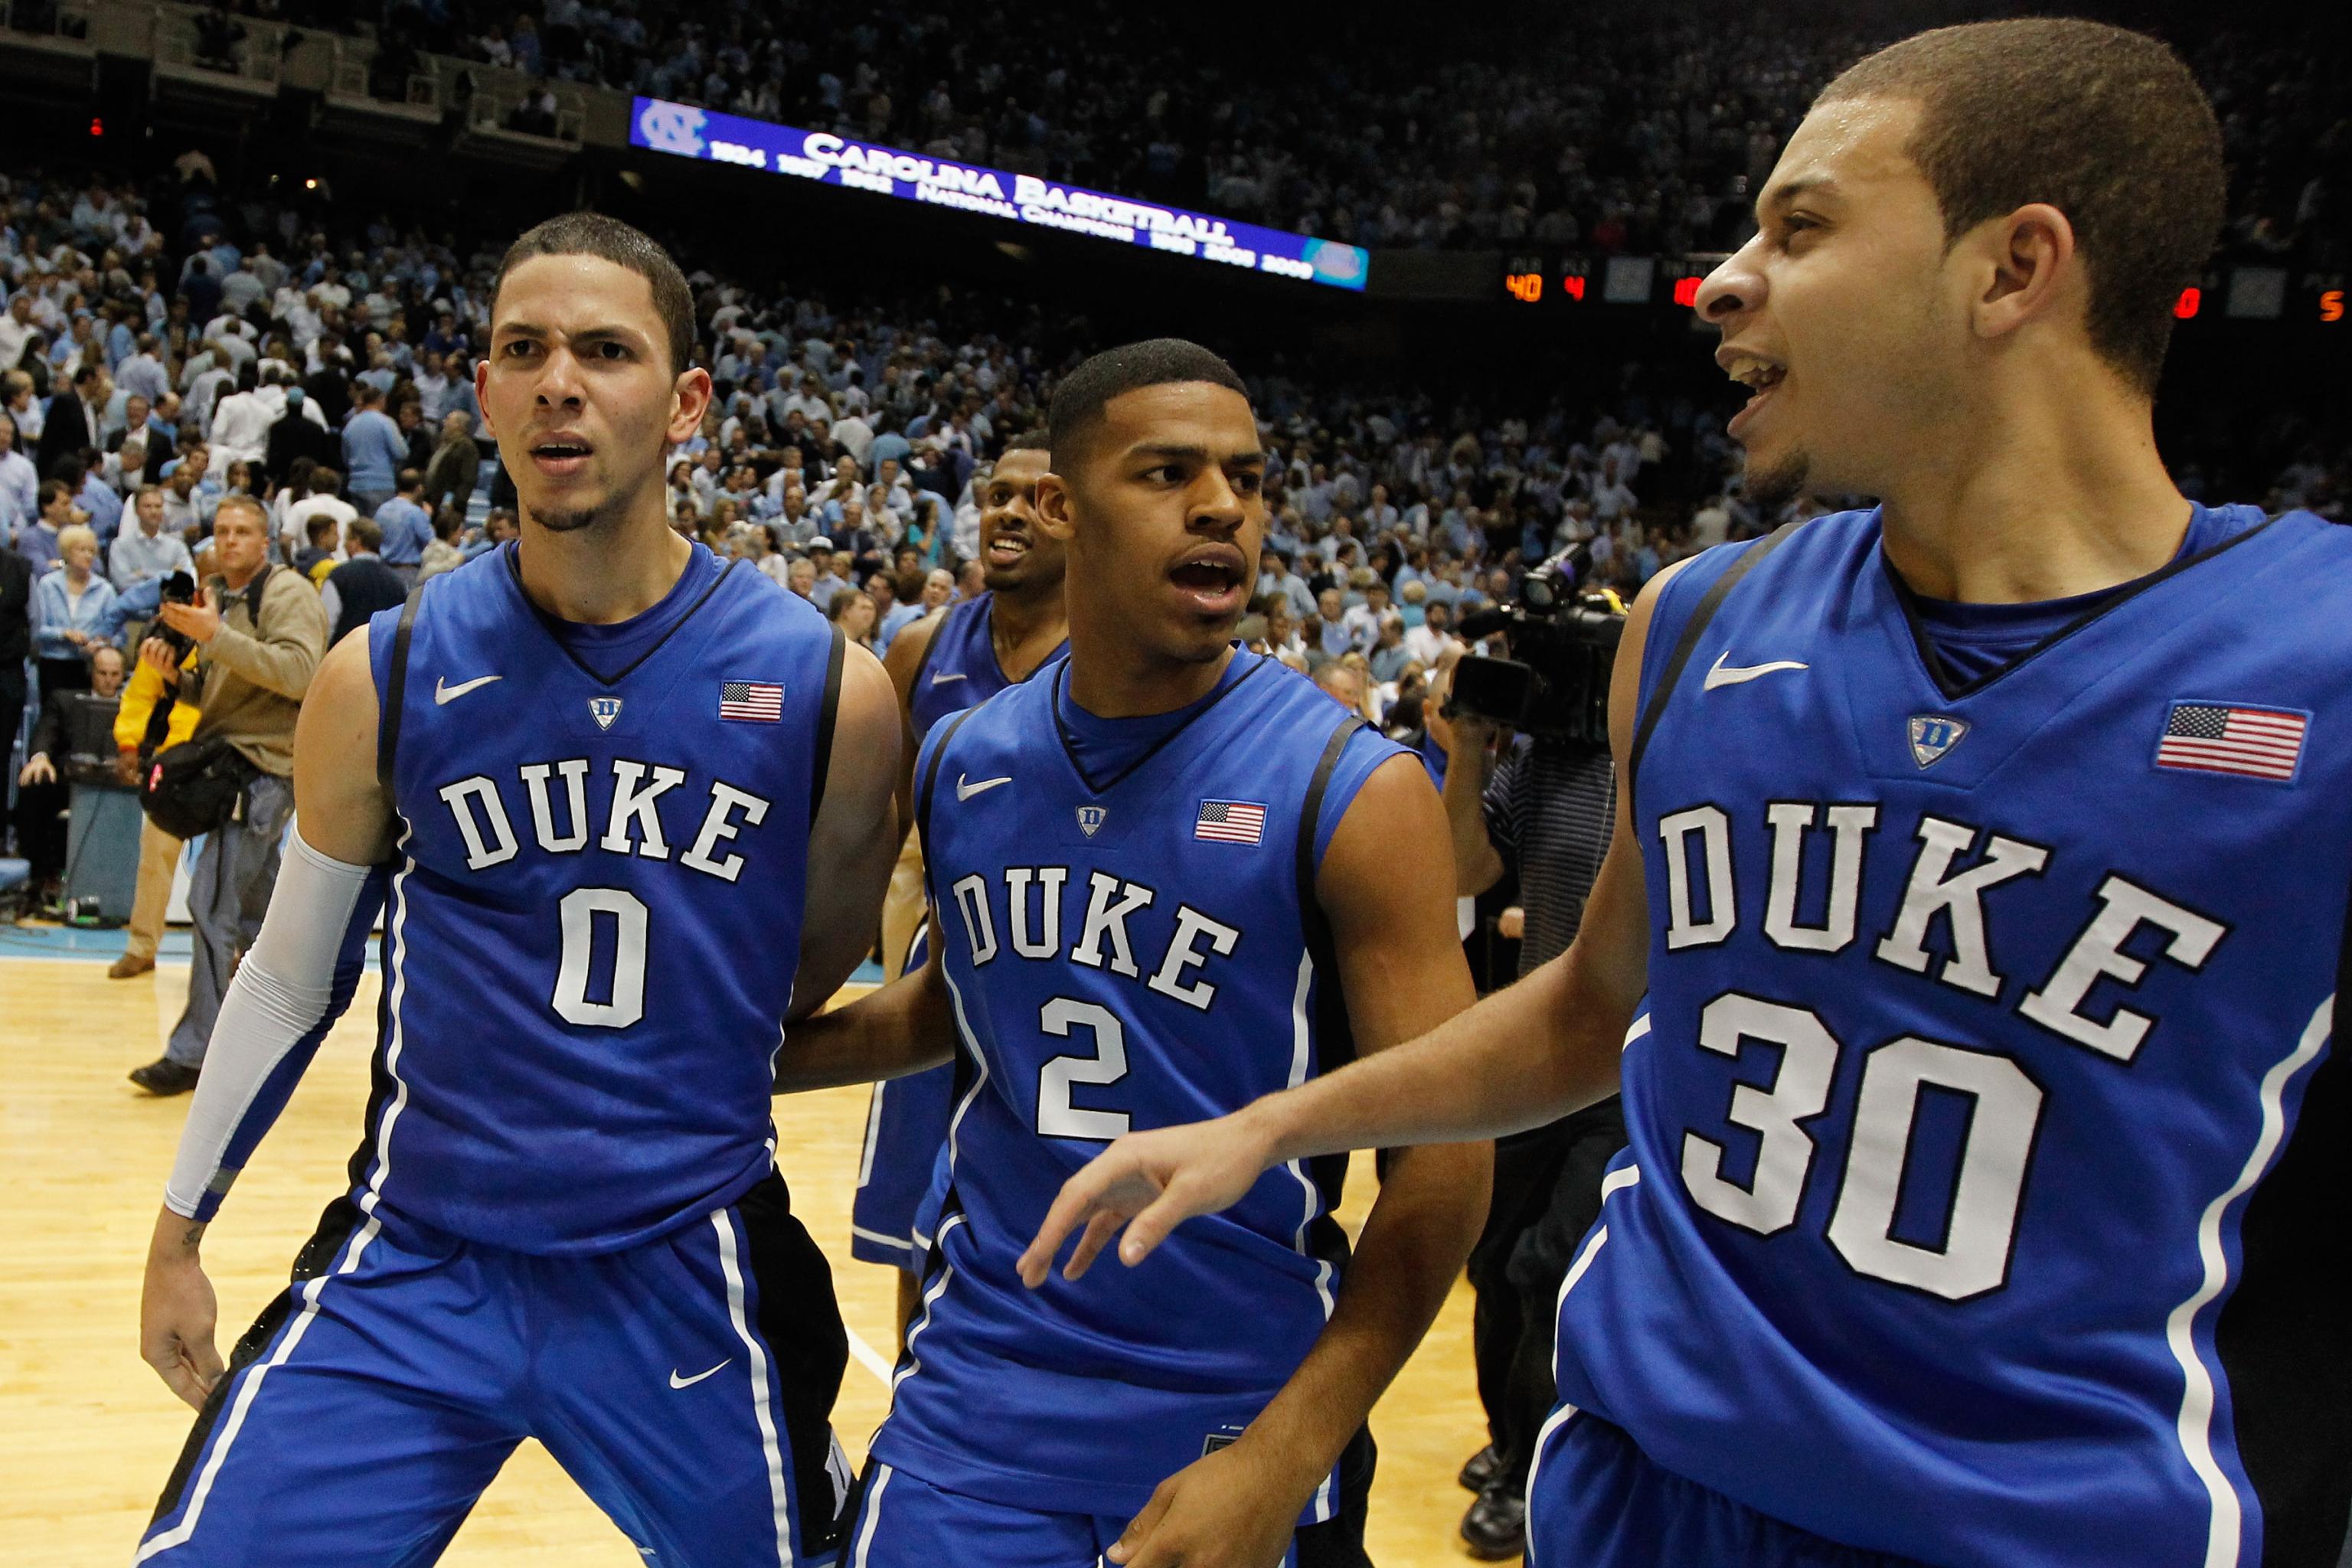 Seth Curry Turns Heads Since Transferring to Duke - The New York Times